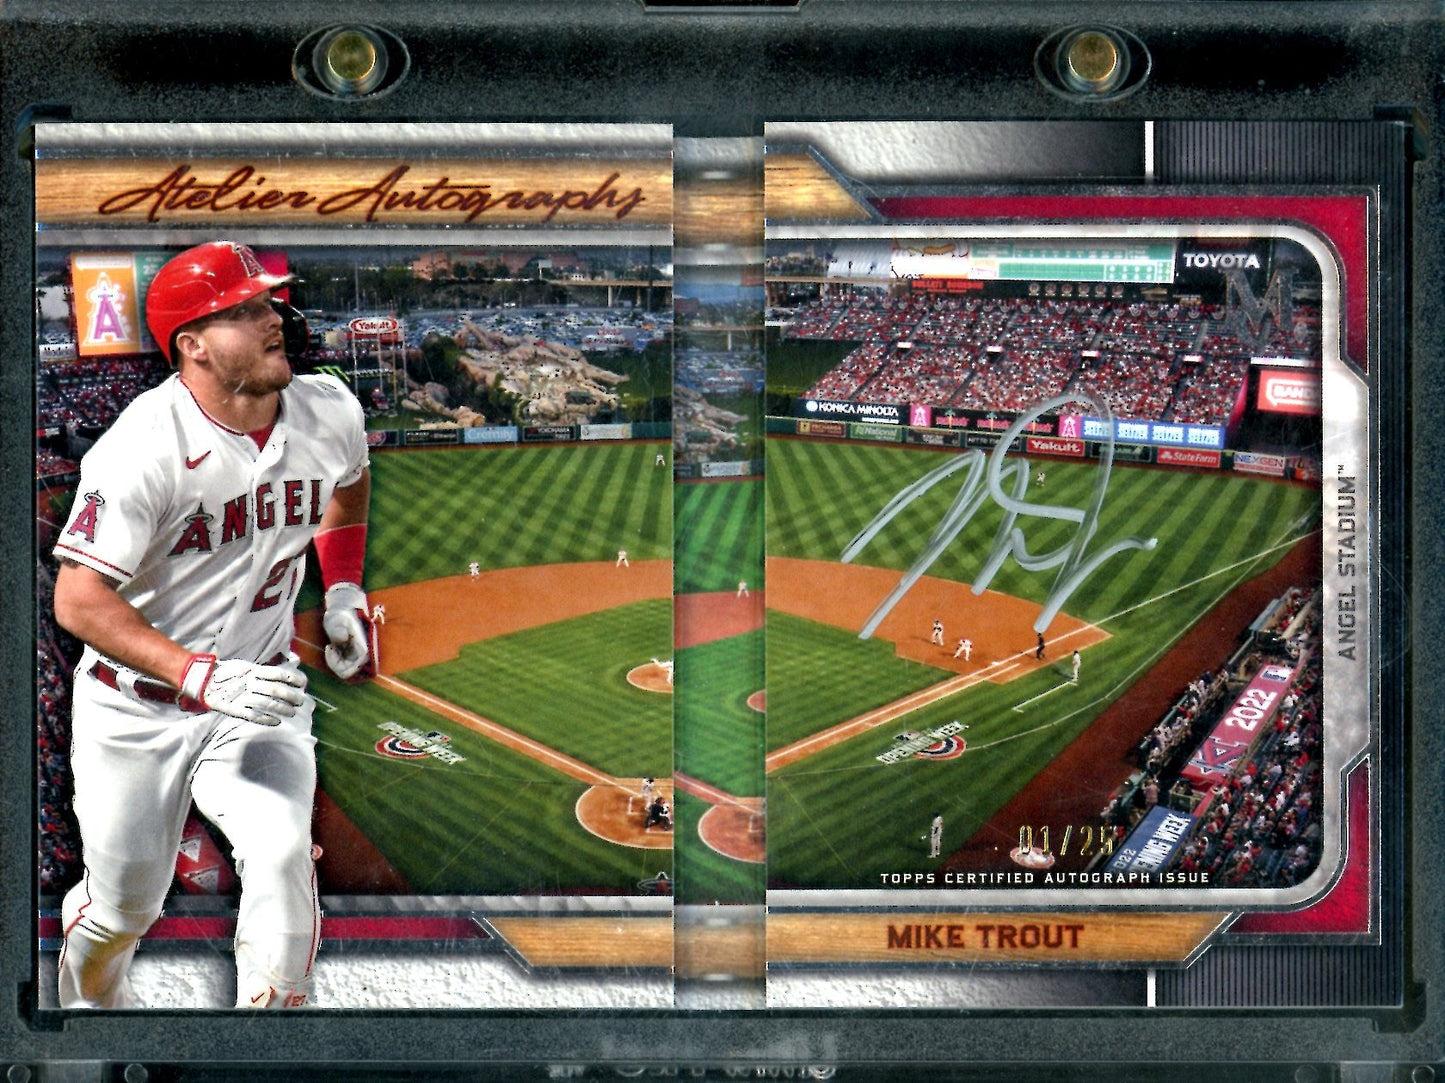 2023 Topps Museum Mike Trout Atelier Booklet Auto /25 Angels